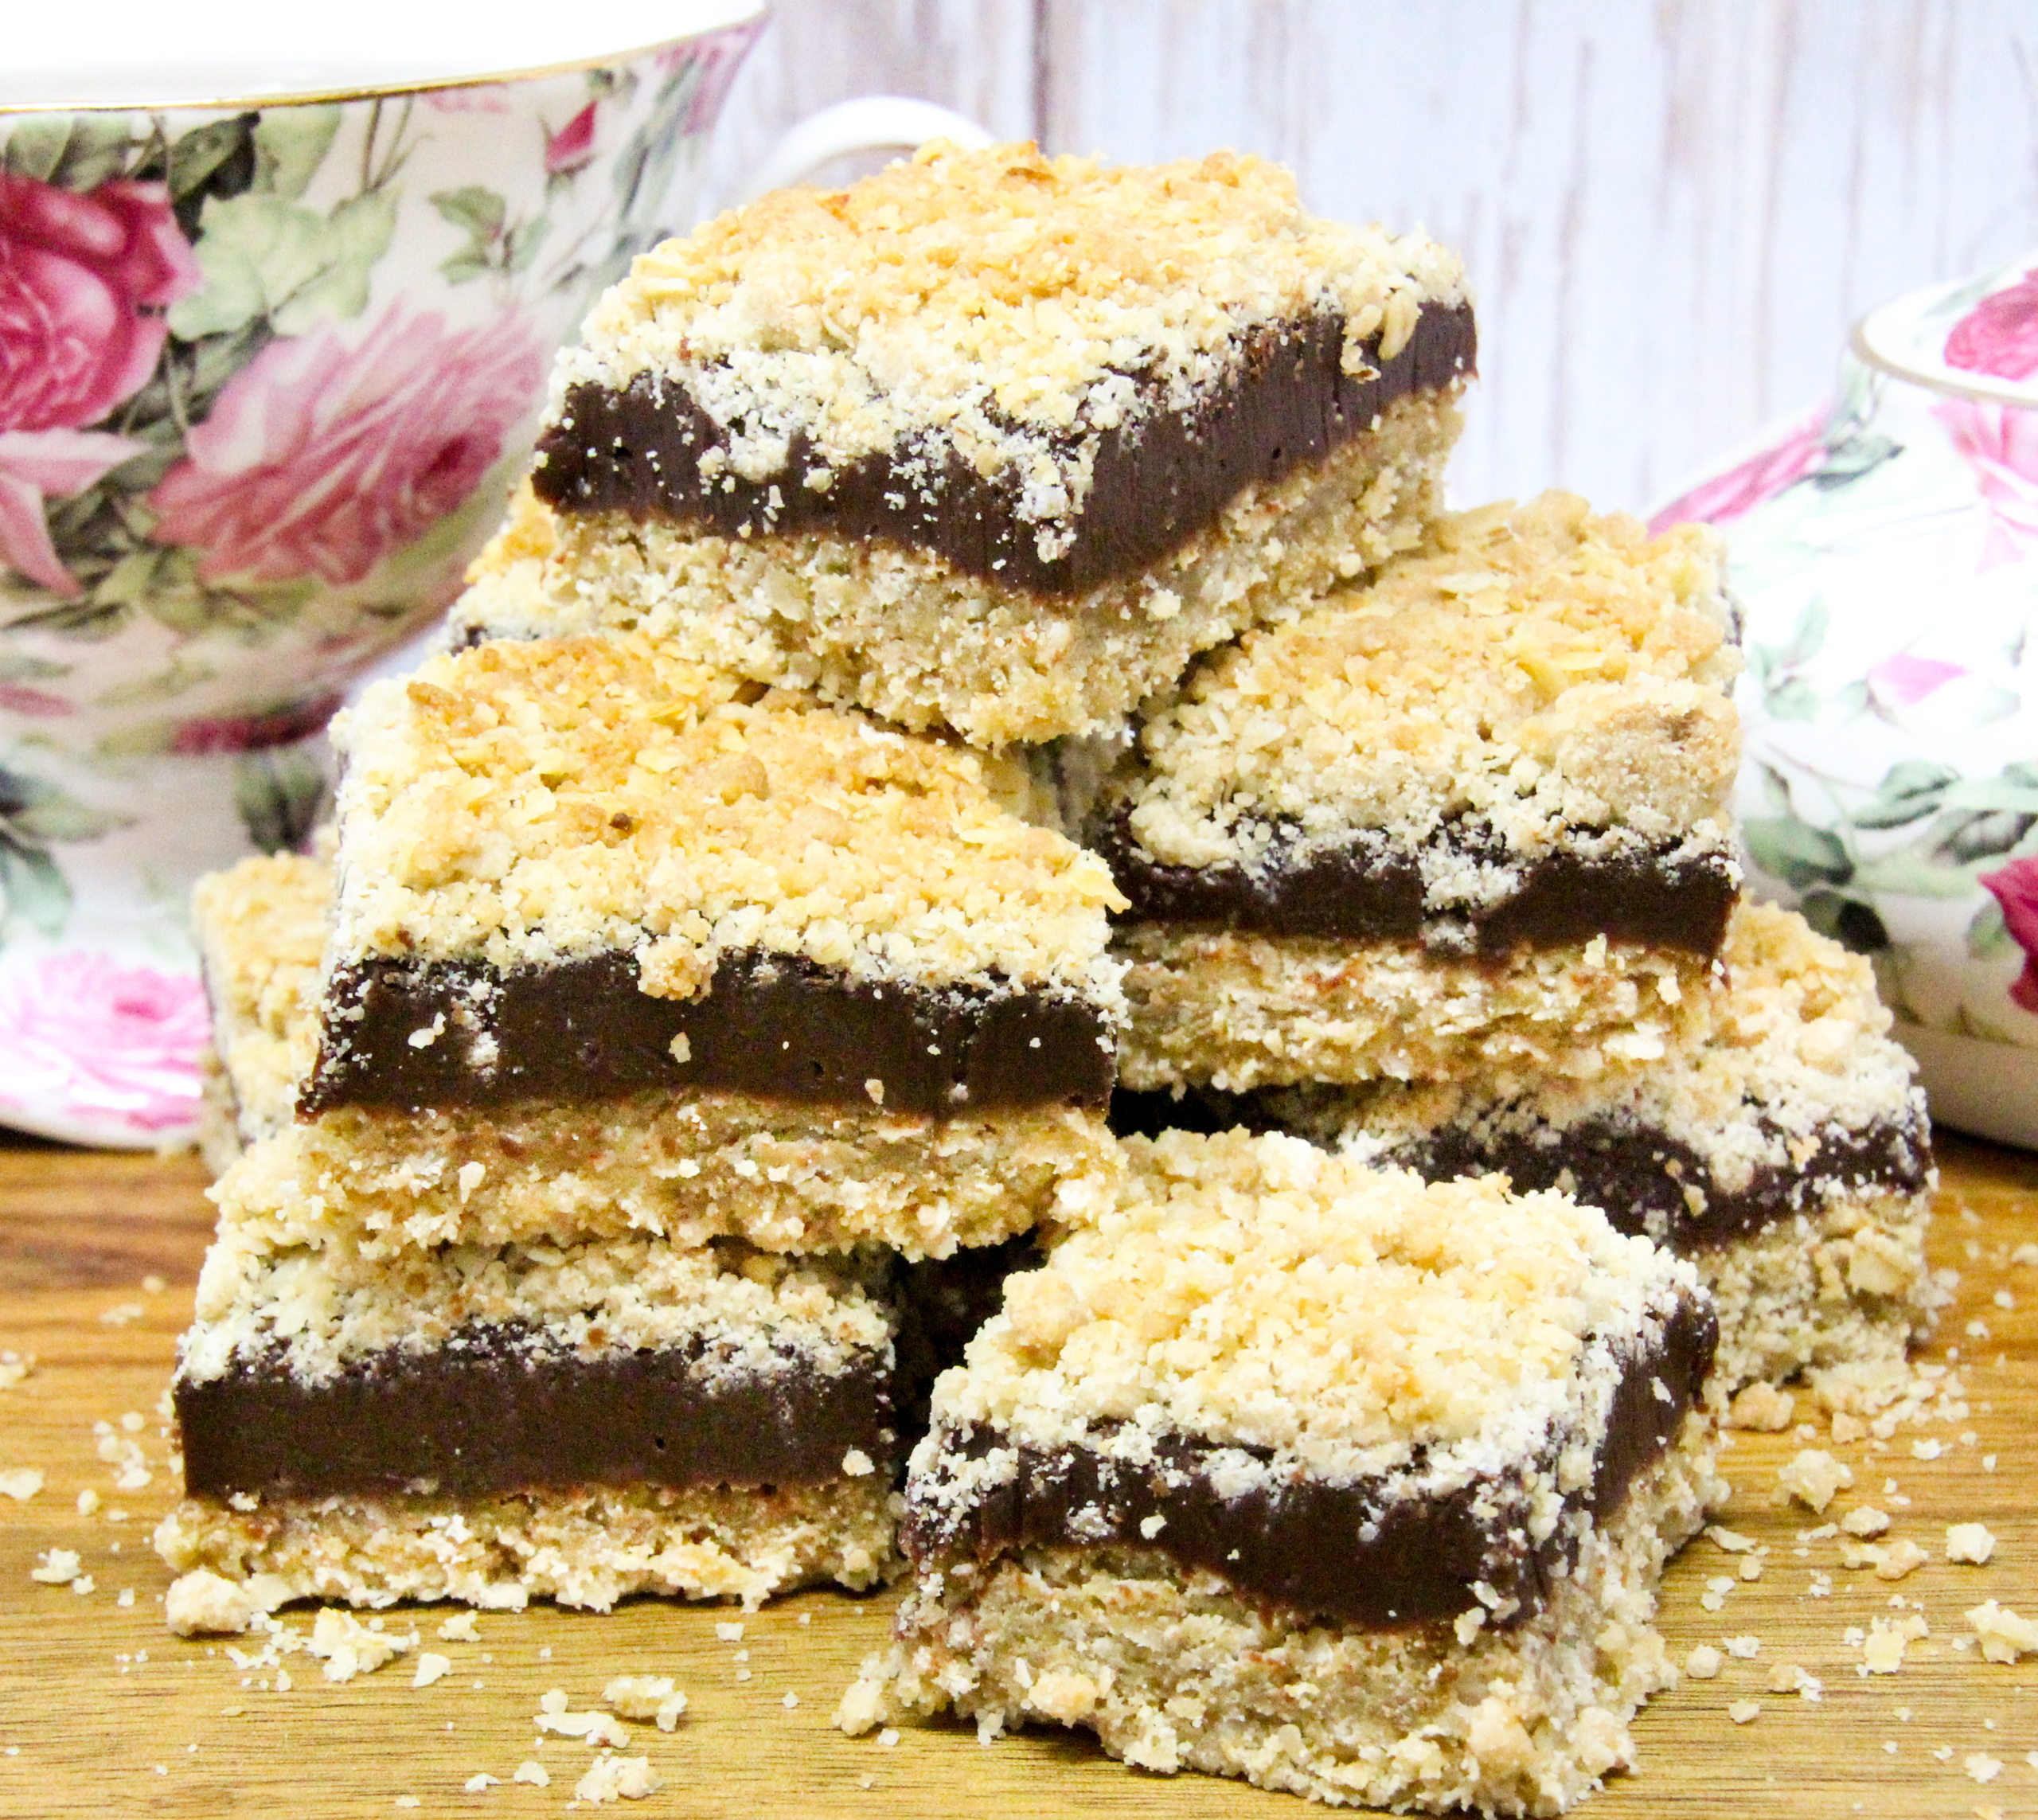 Fudgy Oatmeal Bars are a substantial treat with the addition of oatmeal which offsets (kind of) the sugar high from the rich, fudgy center. Recipe shared with permission granted by Nancy J. Coco, author of THREE FUDGES AND A BABY. 